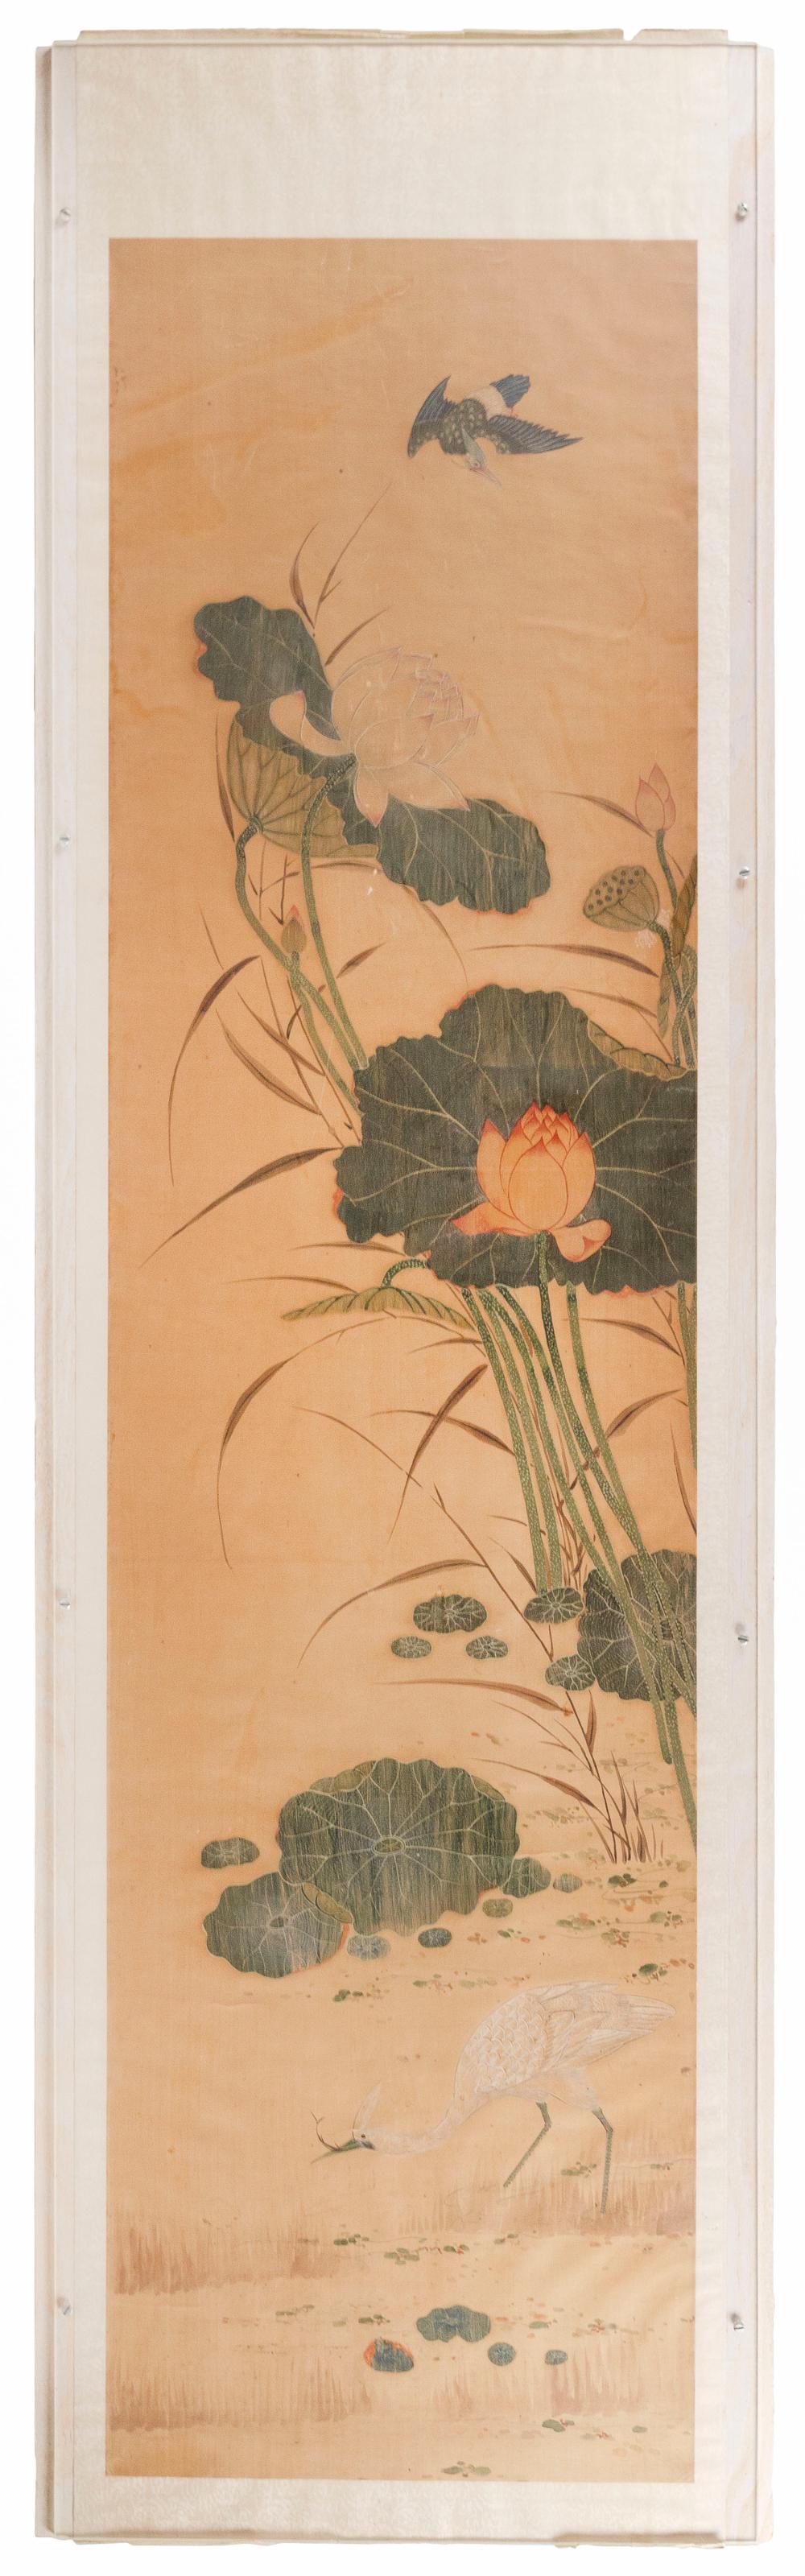 CHINESE SCROLL PAINTING ON SILK 34e03e